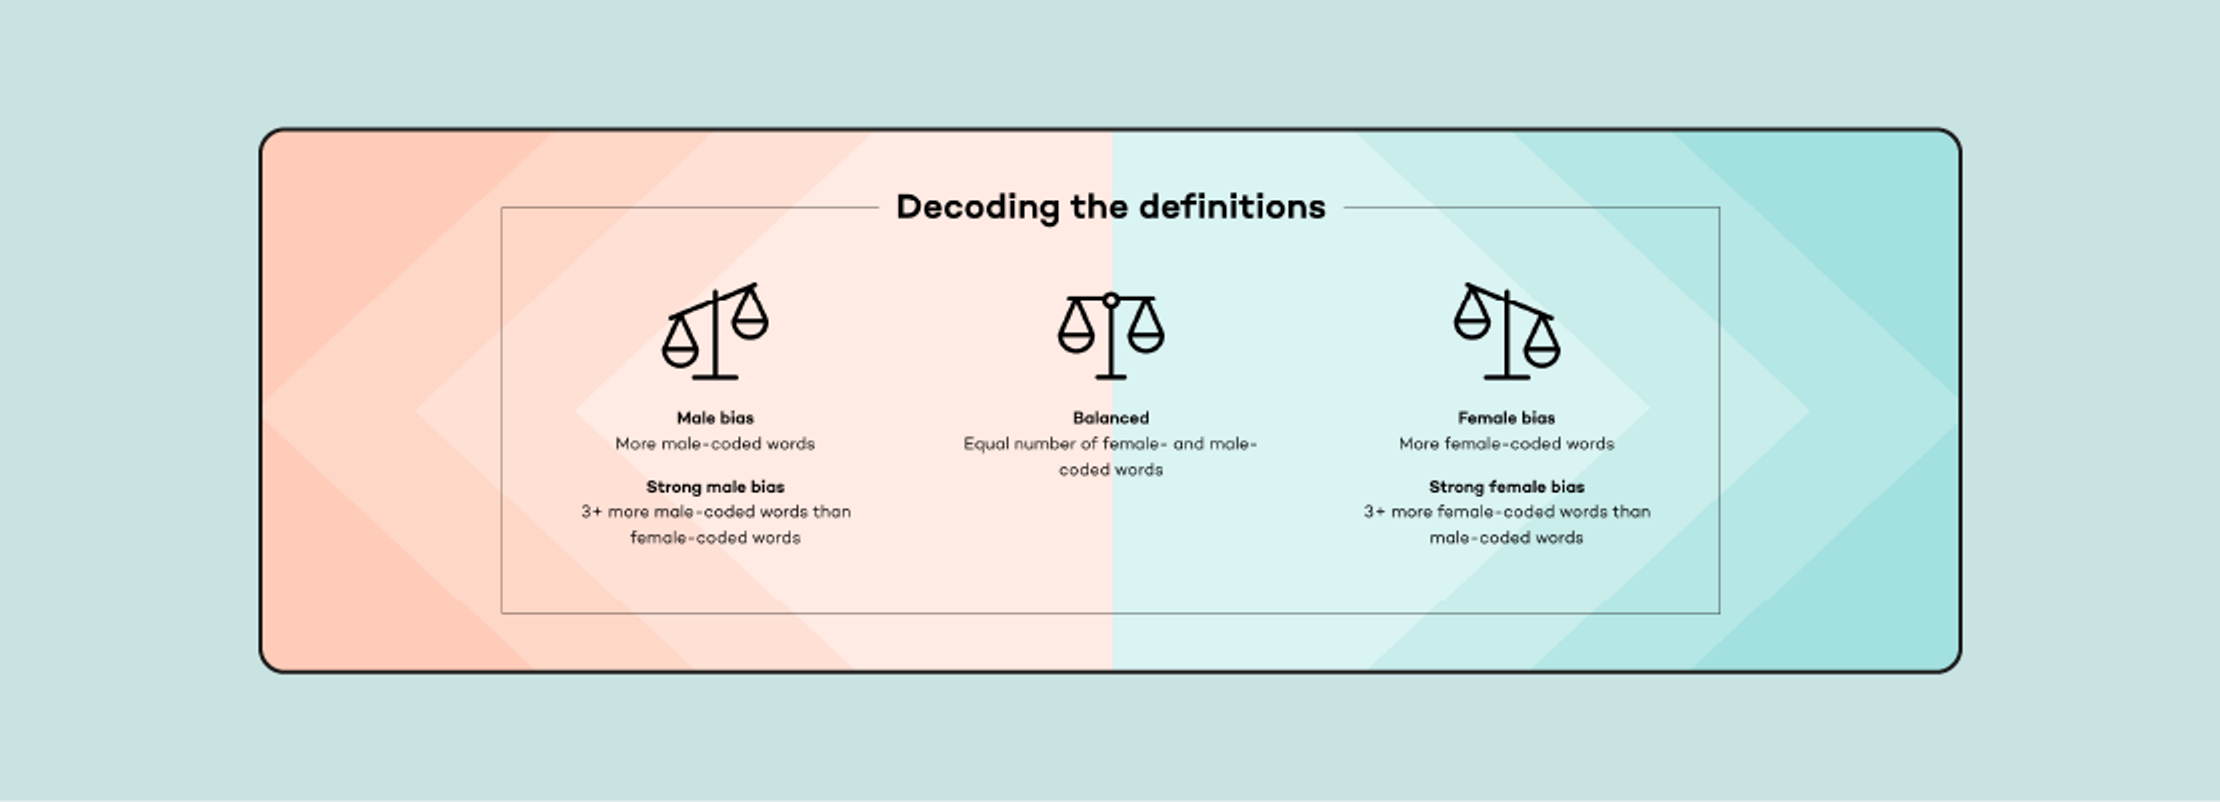 A graphic titled 'Decoding the definitions' with three sections explaining the definitions of male-bias, balanced and female-bias used in the decoder.